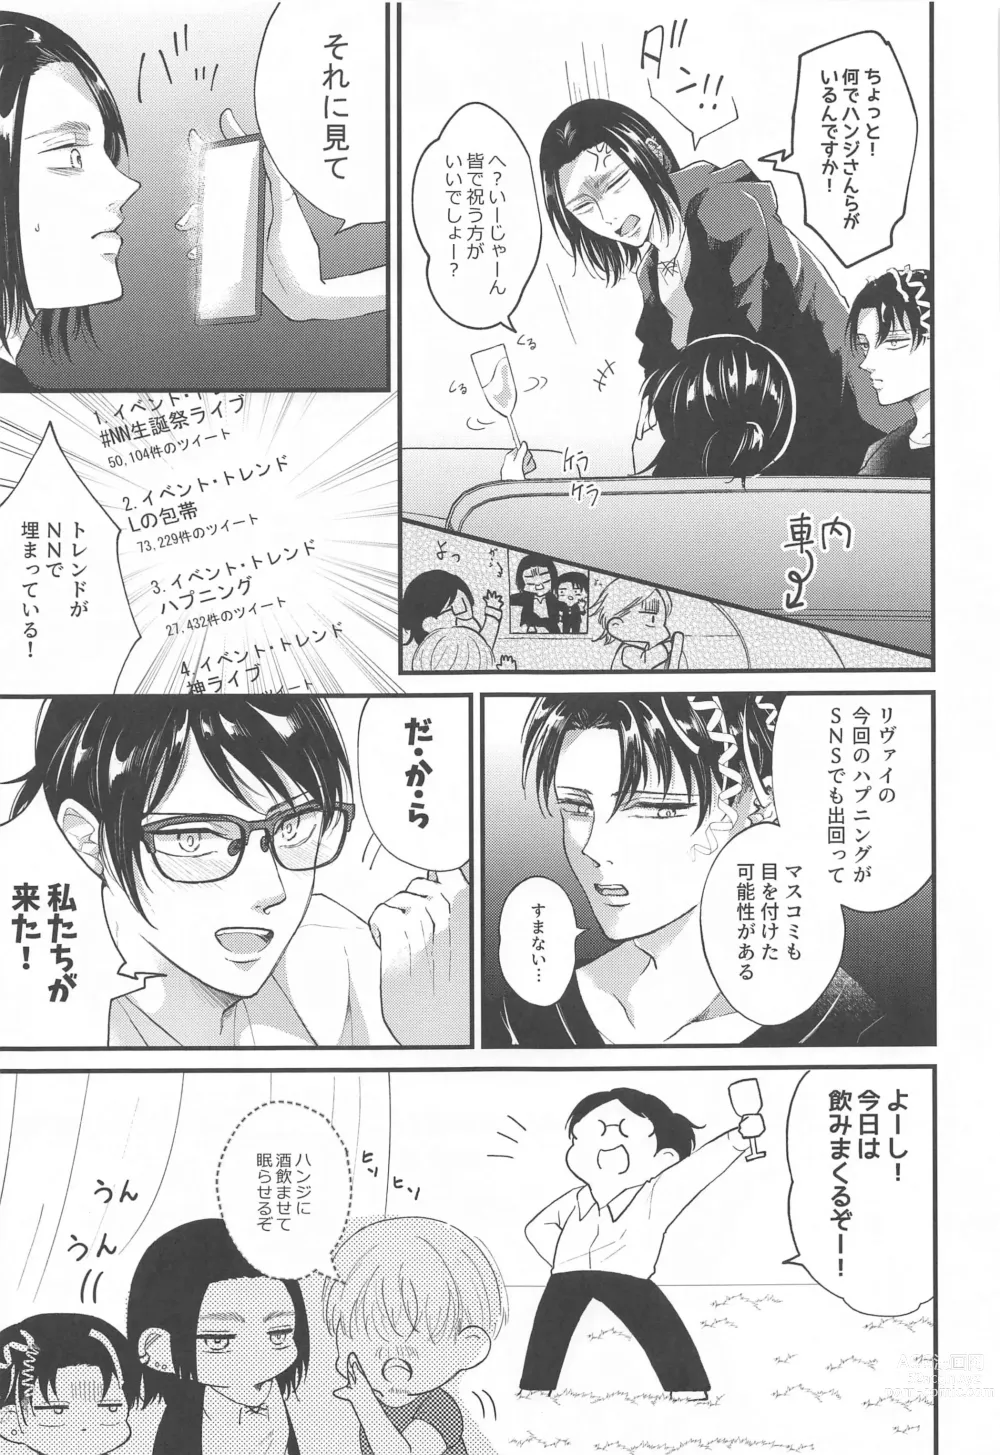 Page 18 of doujinshi Suggestive Birthday